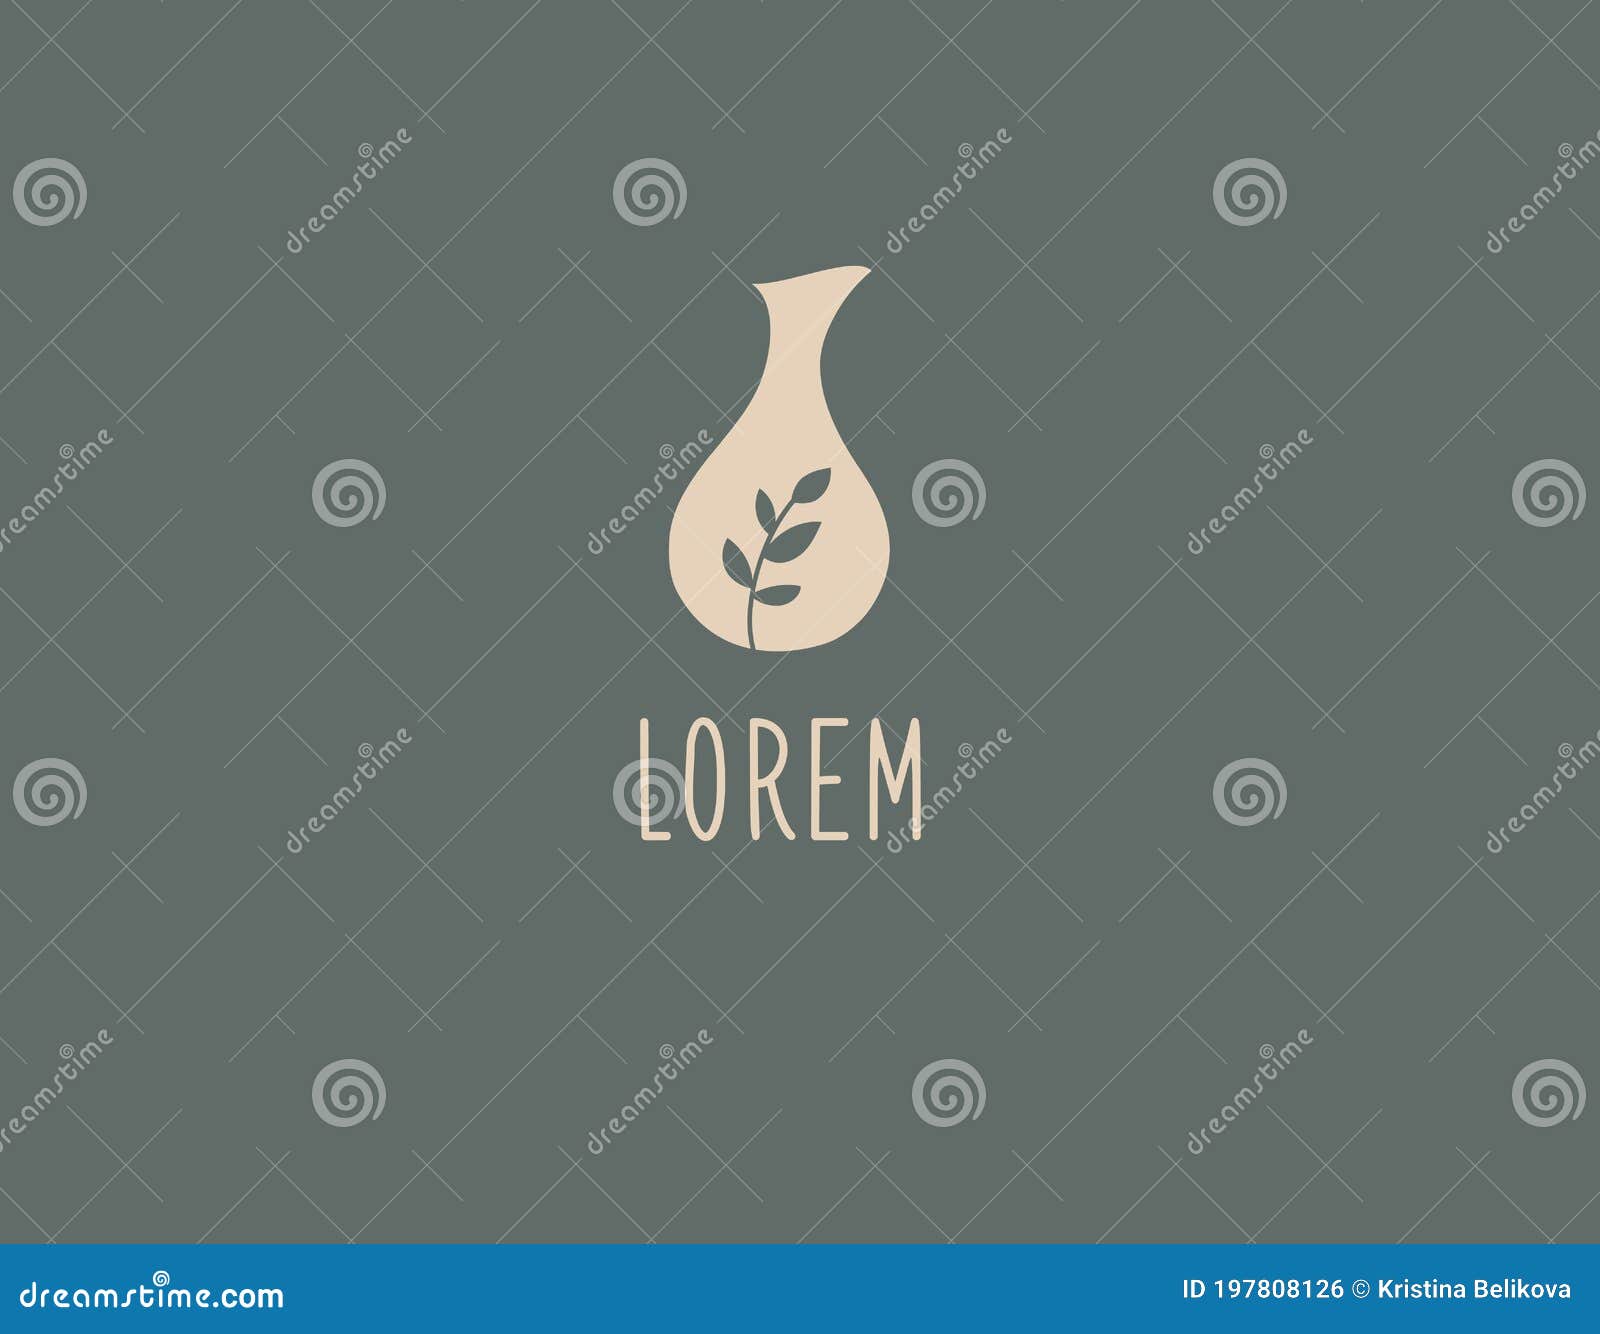 abstract ethnics logo for ceramic pottery shop jug and plant branch